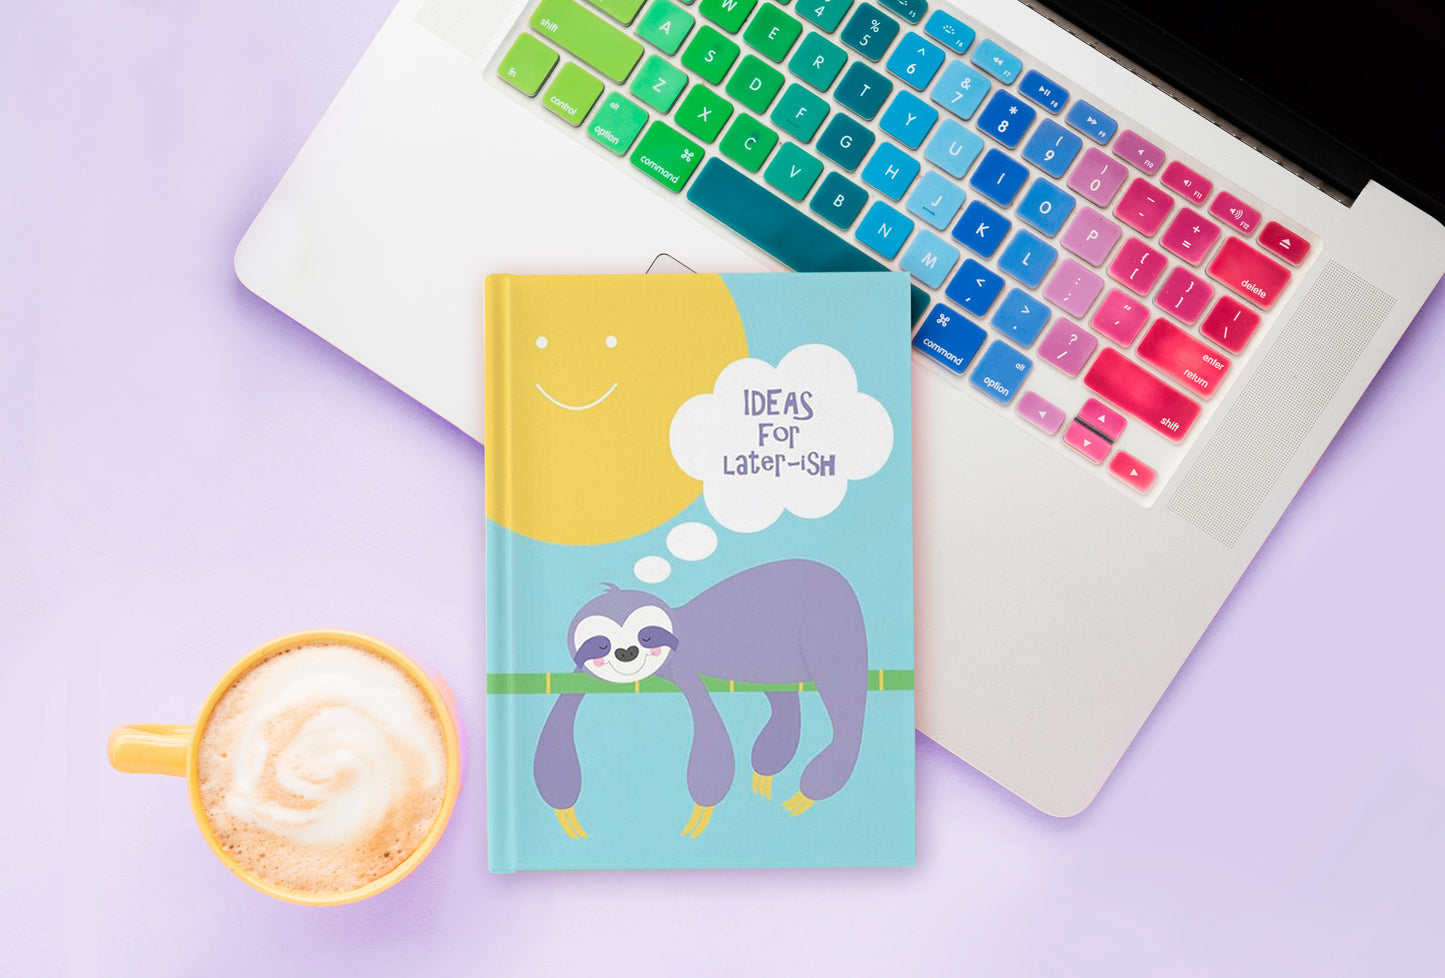 Sloth ideas hardcover journal